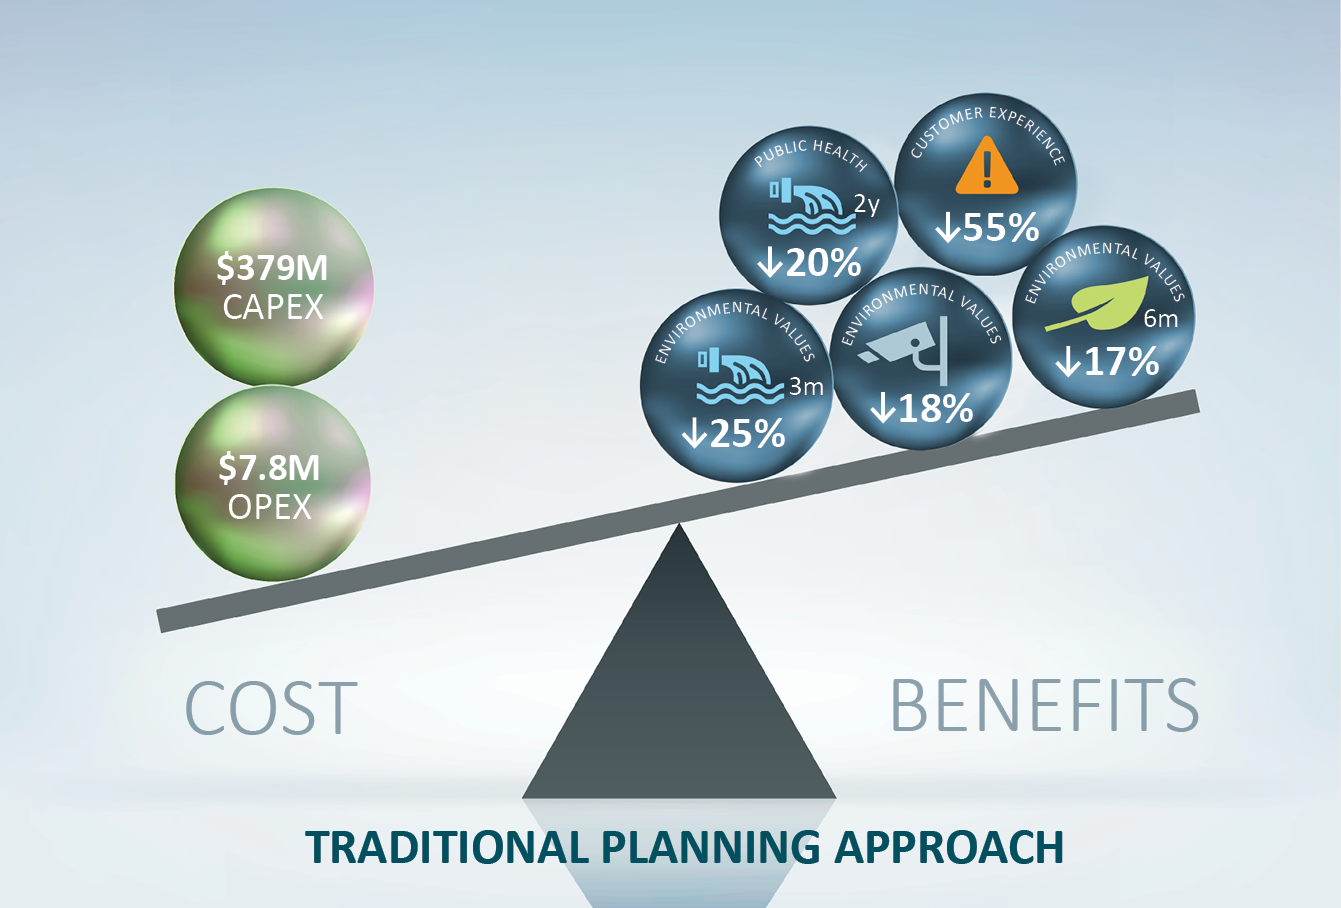 Integrated catchment planning approach vs. traditional planning approach